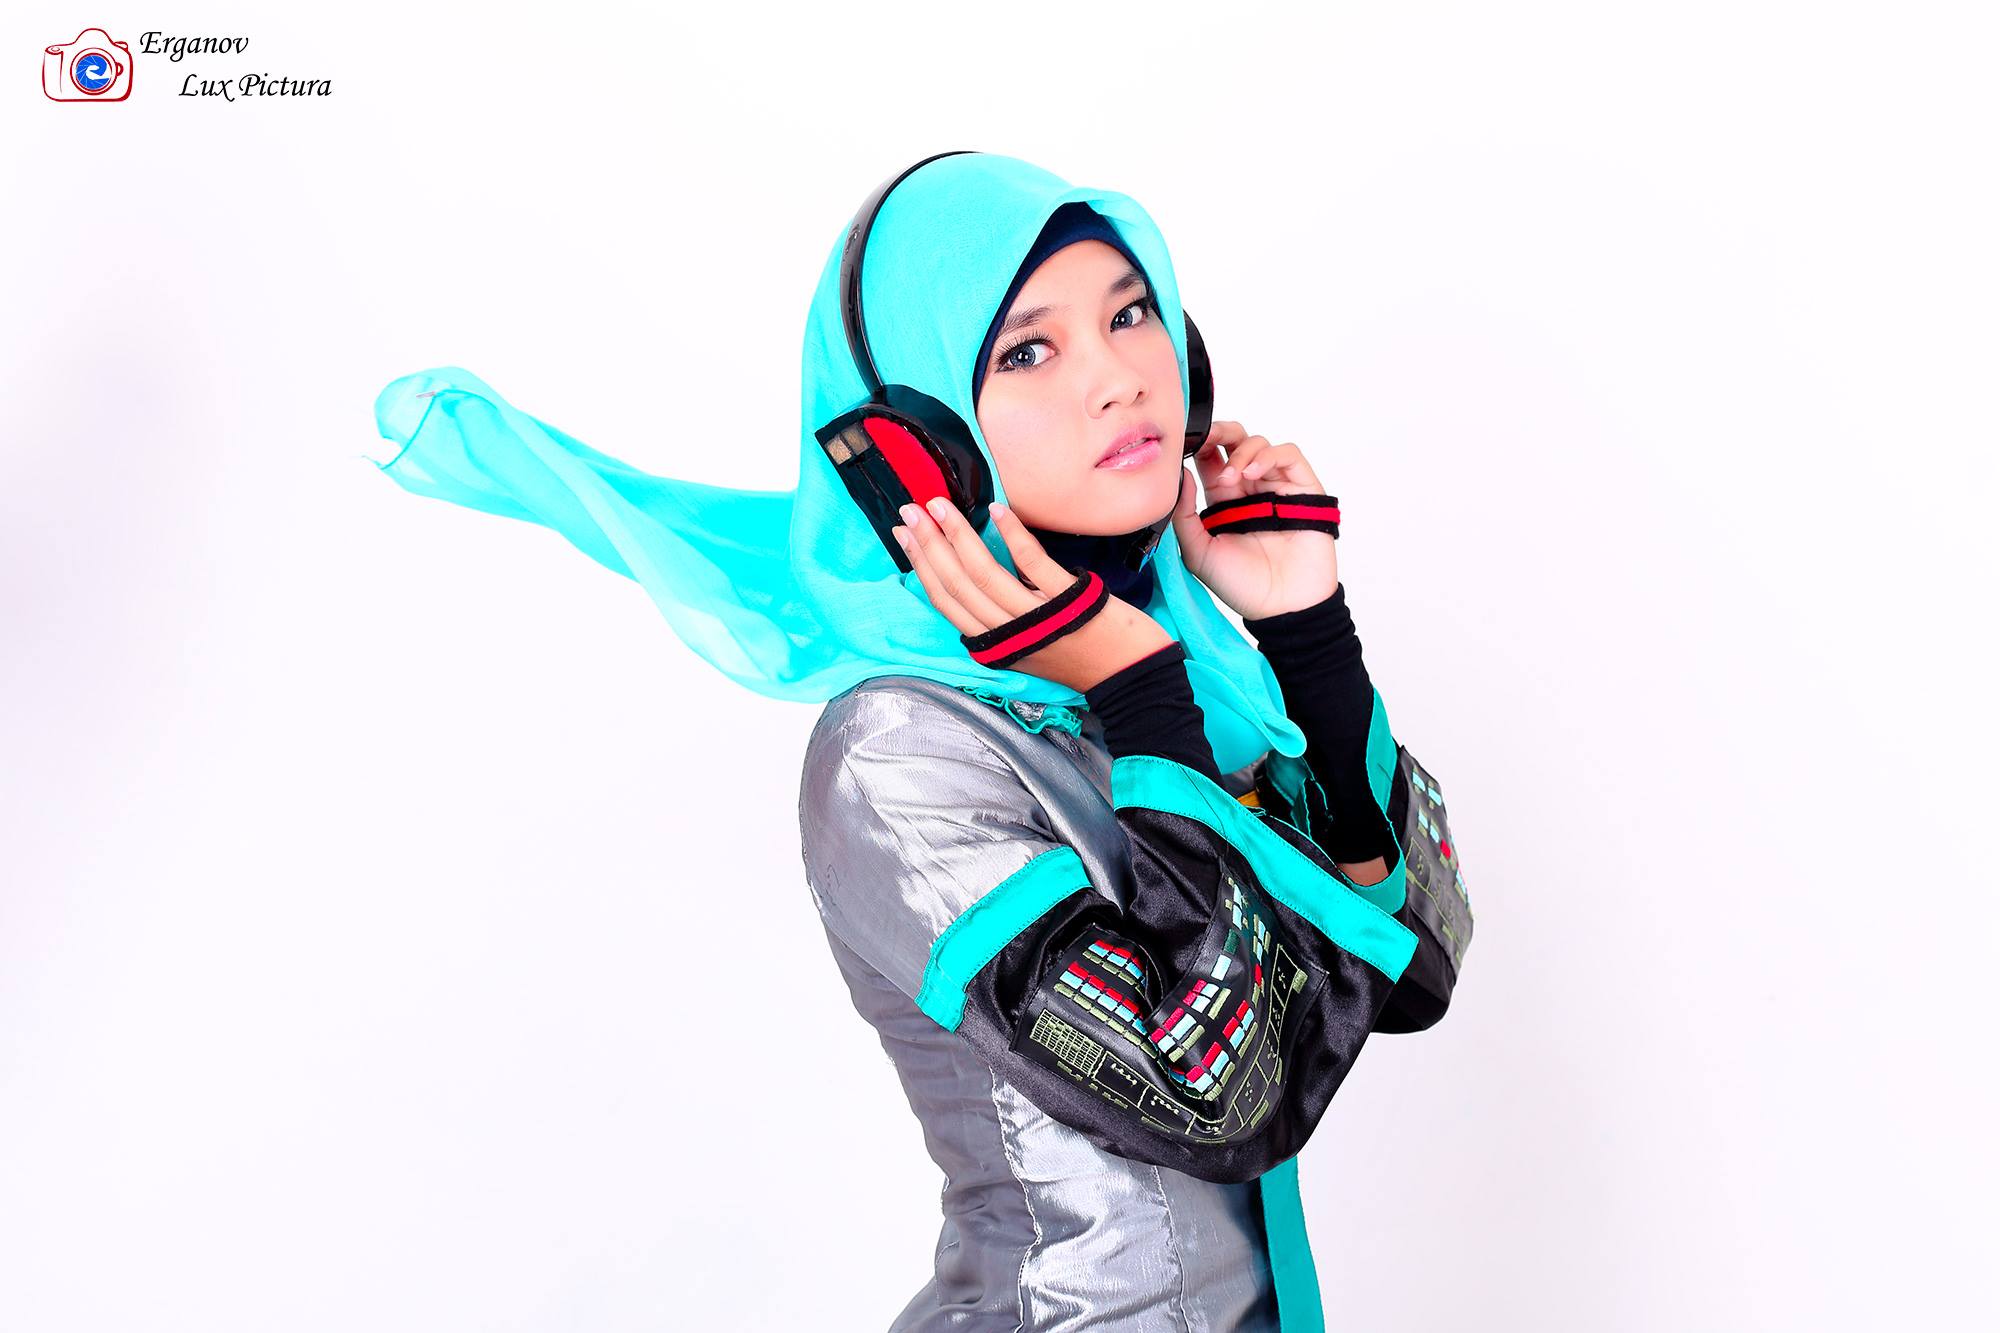 10. "The Cosplayer" - Blue hair is a popular choice for cosplaying characters from anime and video games - wide 9